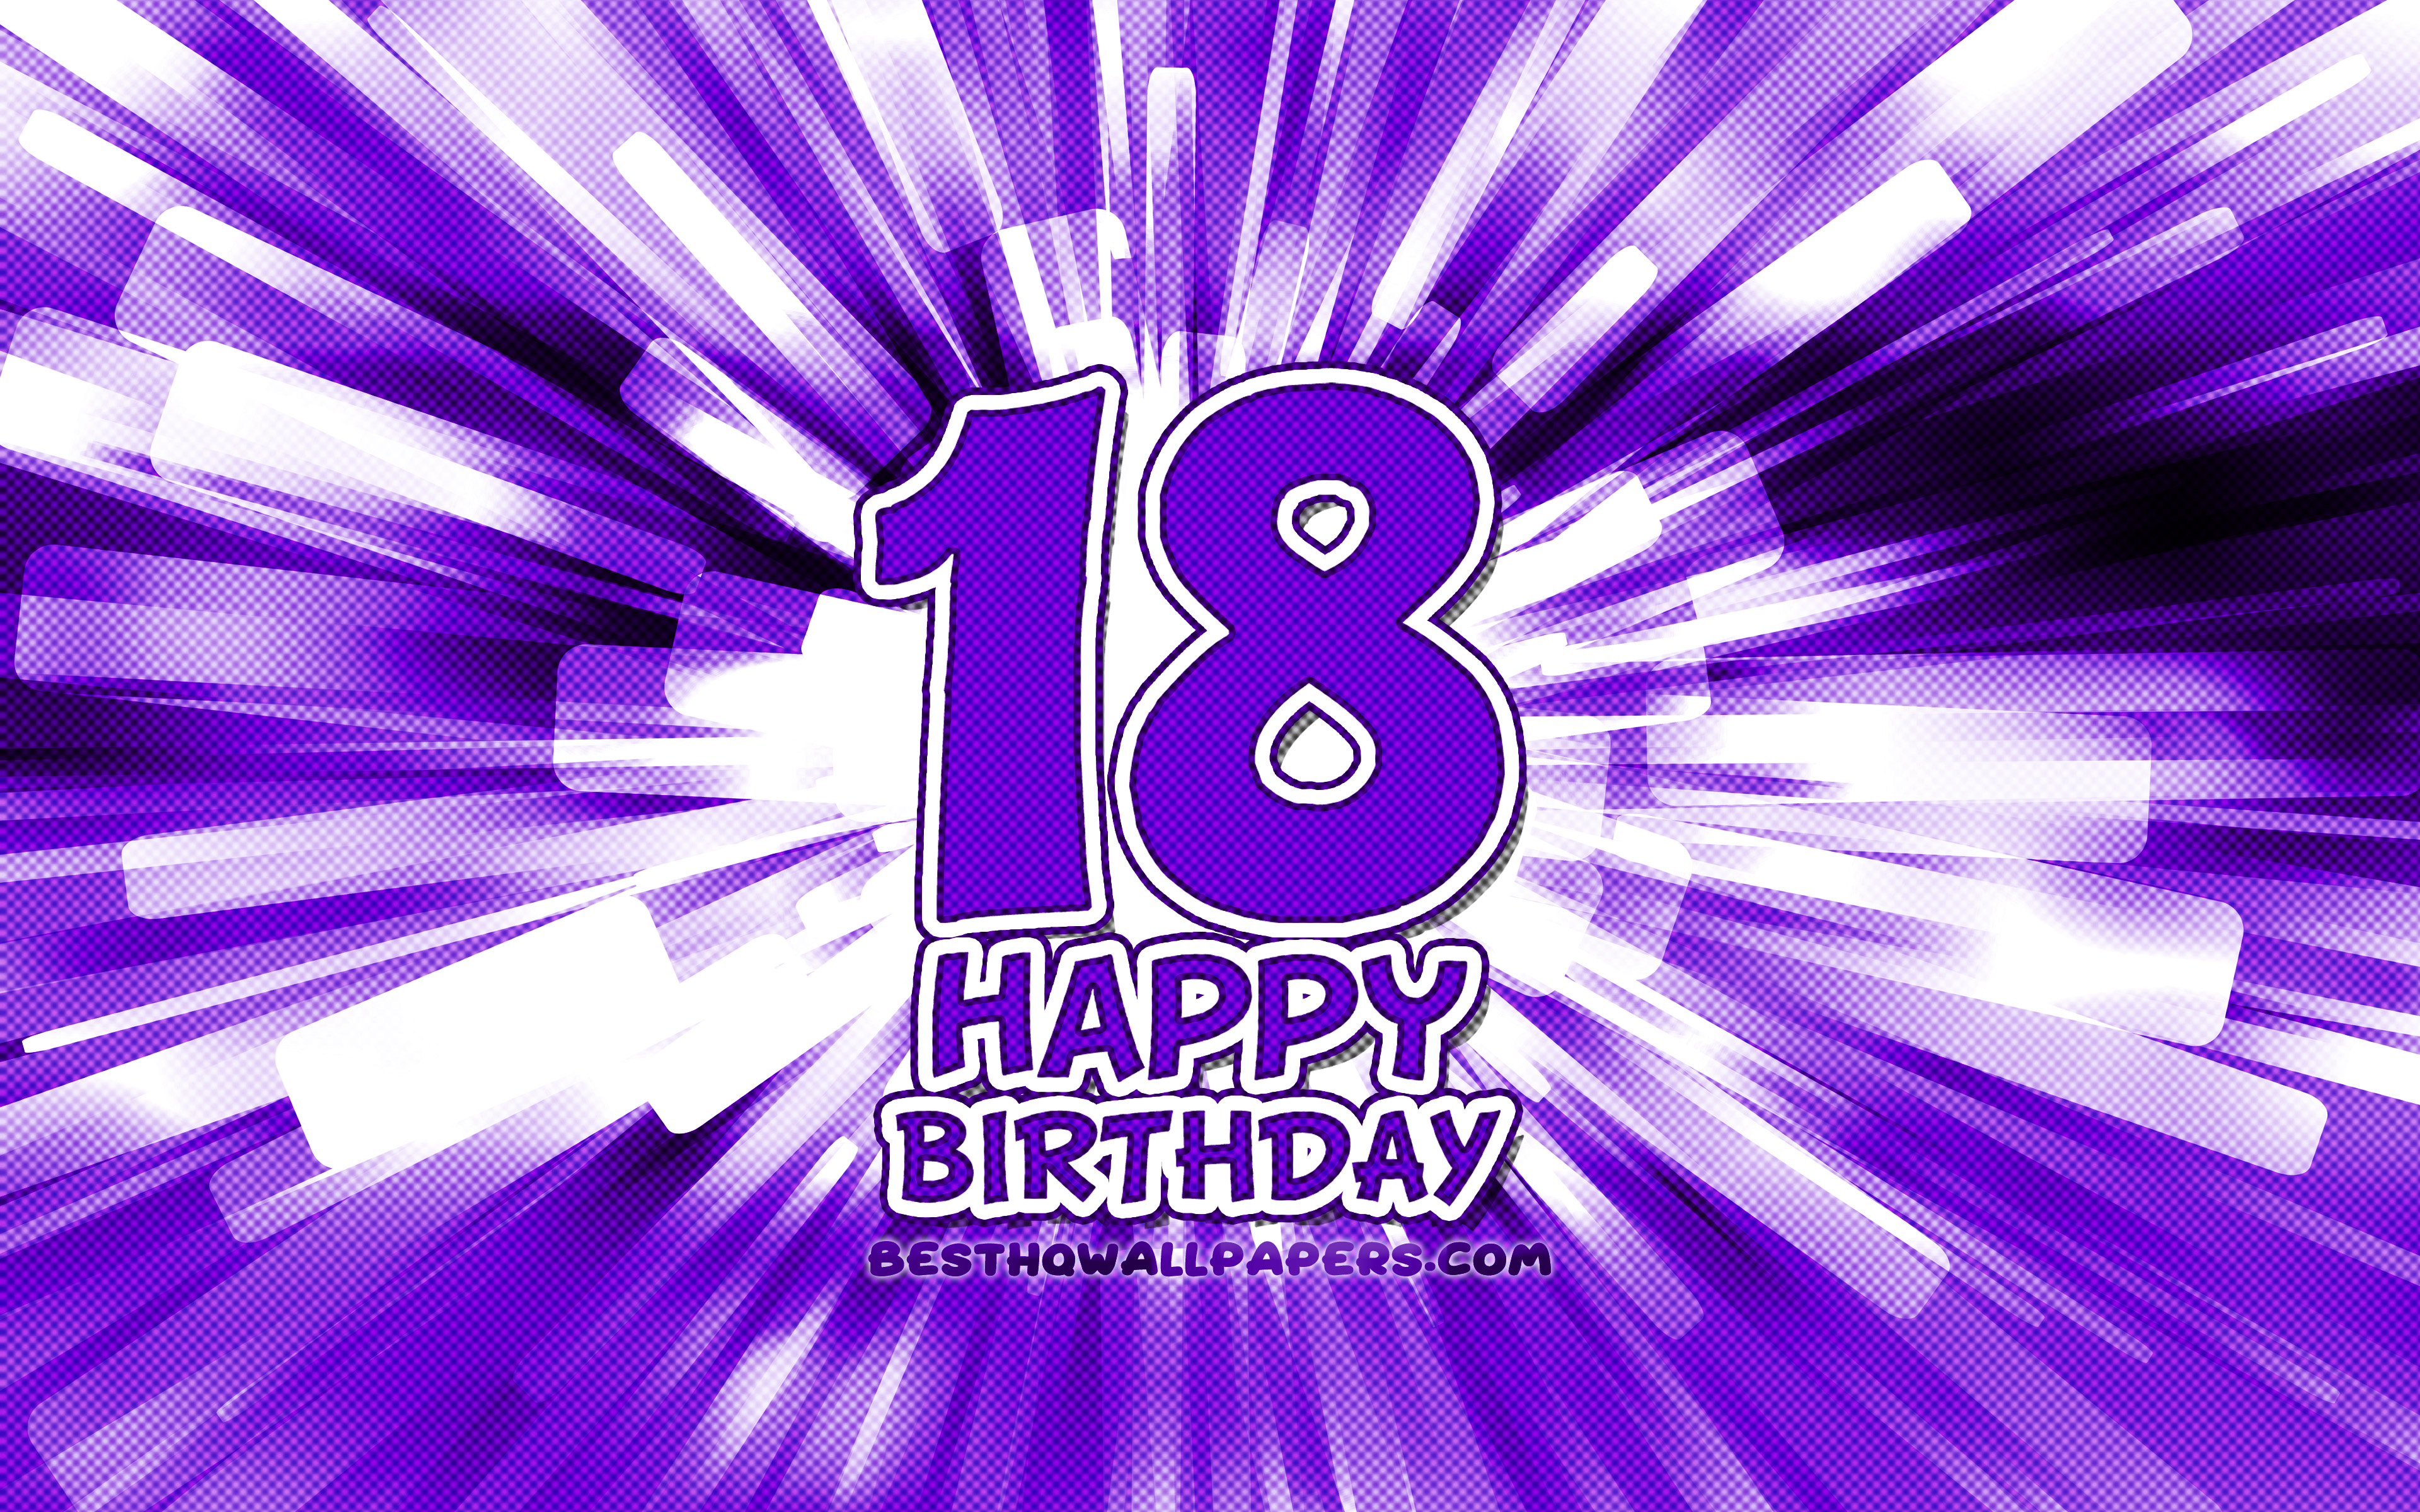 Happy 18th Birthday Messages with Images  Birthday Wishes and Messages by  Davia